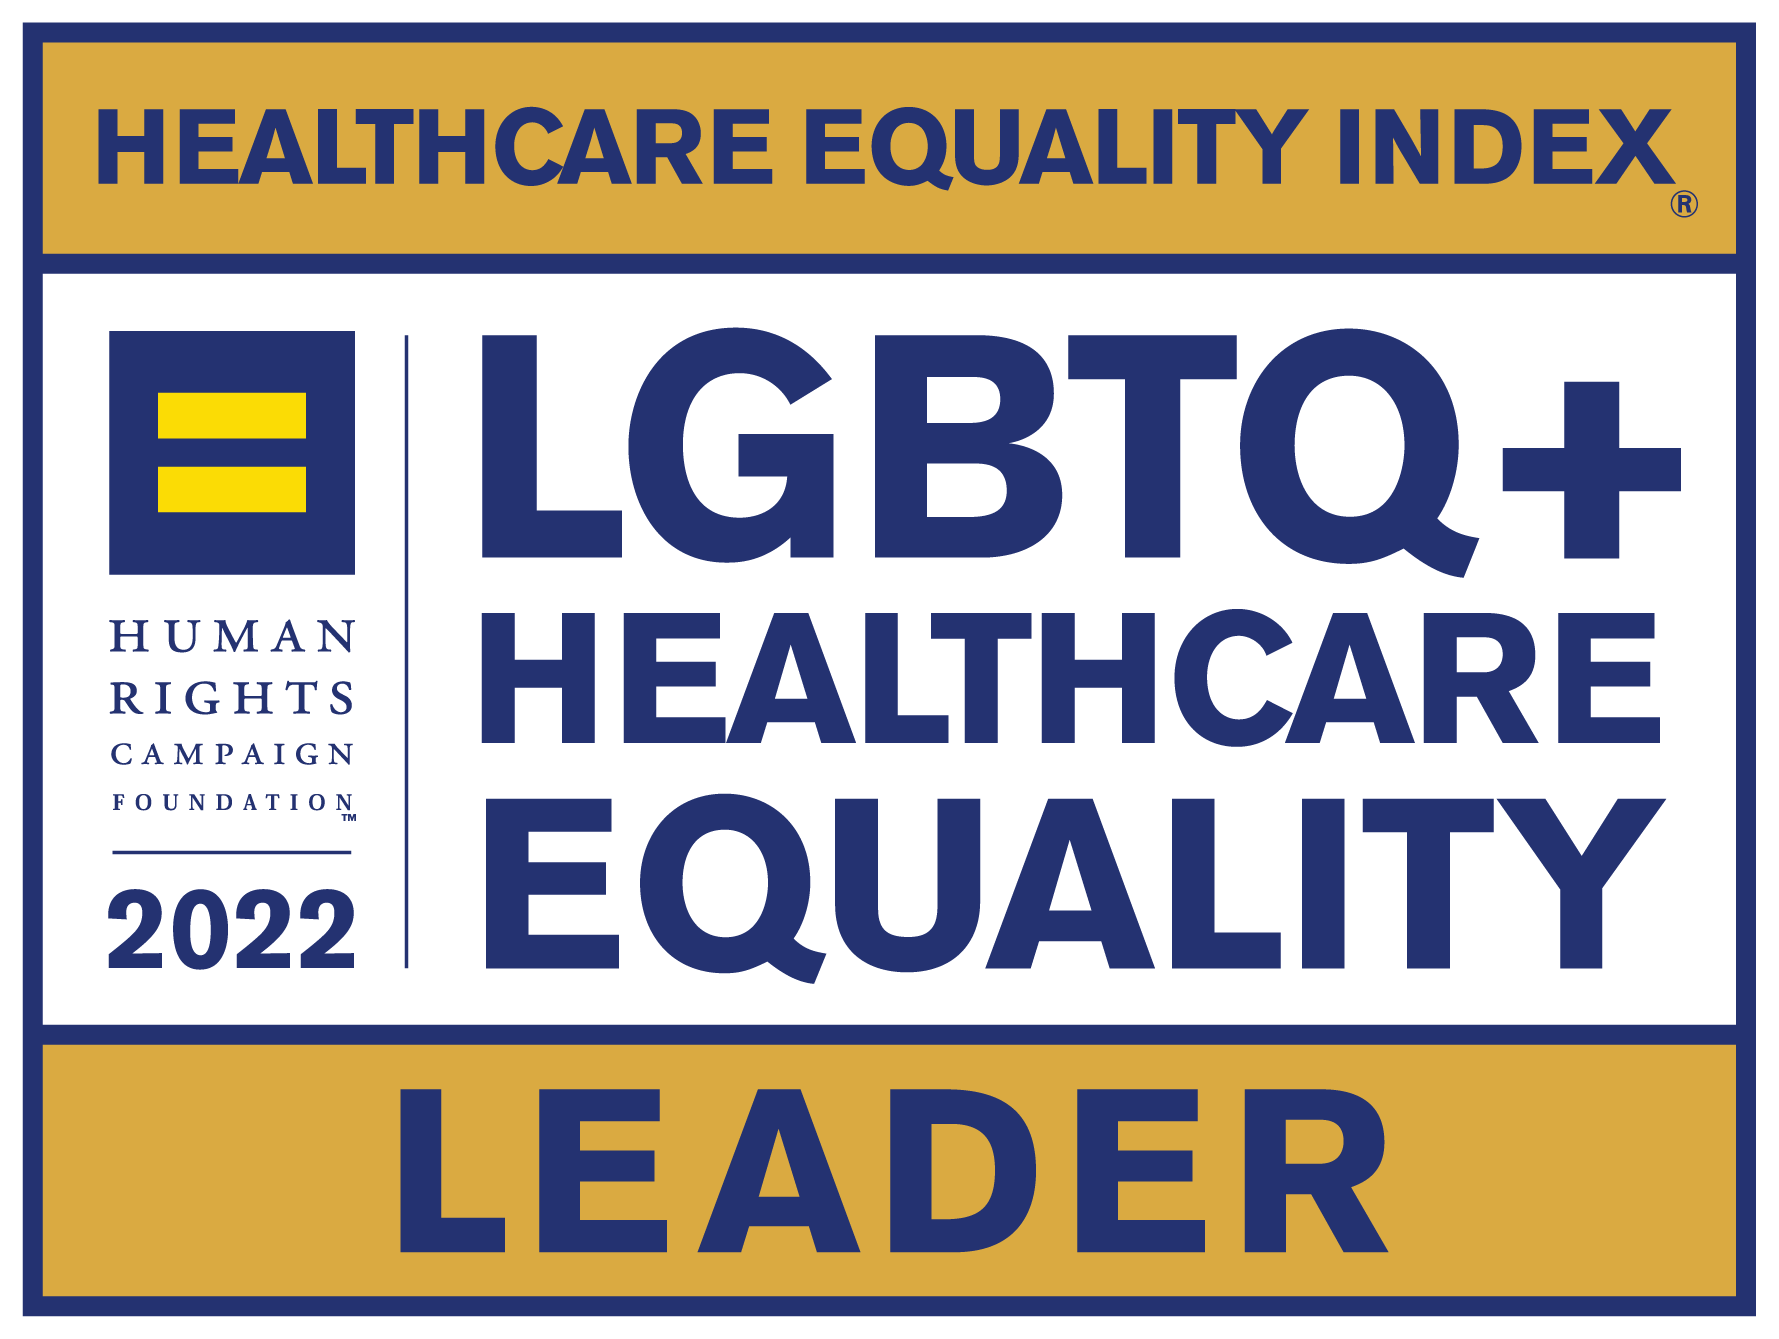 Healthcare Equality Index LGBTQ+ Healthcare Equality Leader 2022 badge